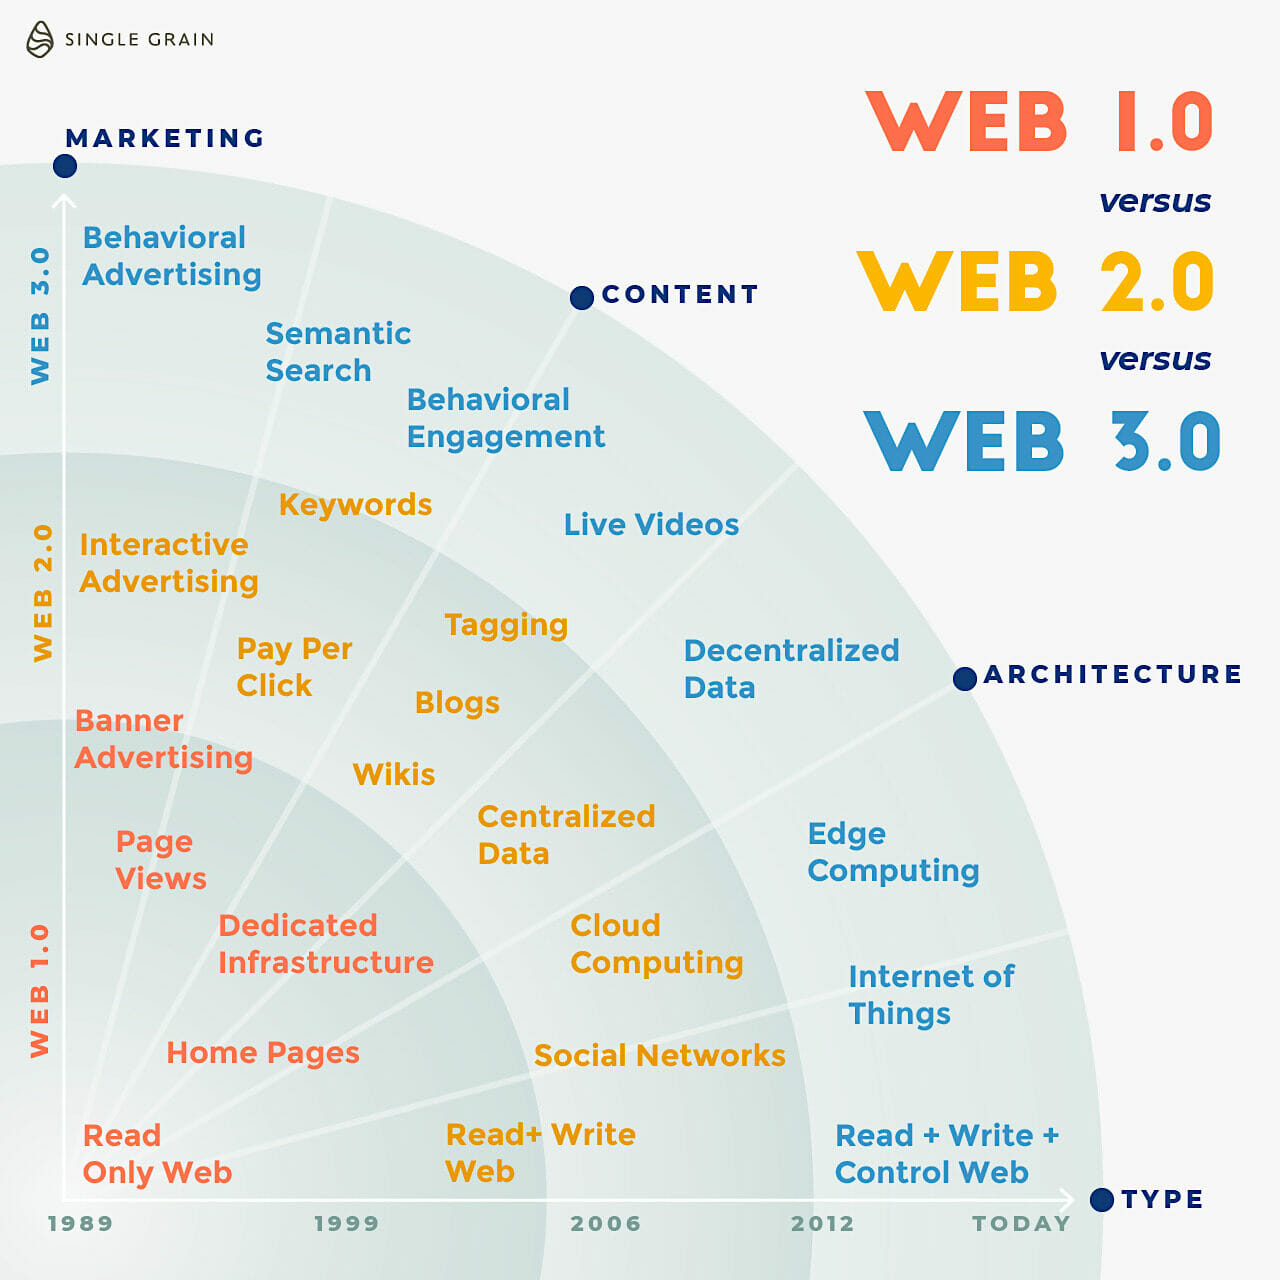 Is Web 3.0 just a hype?